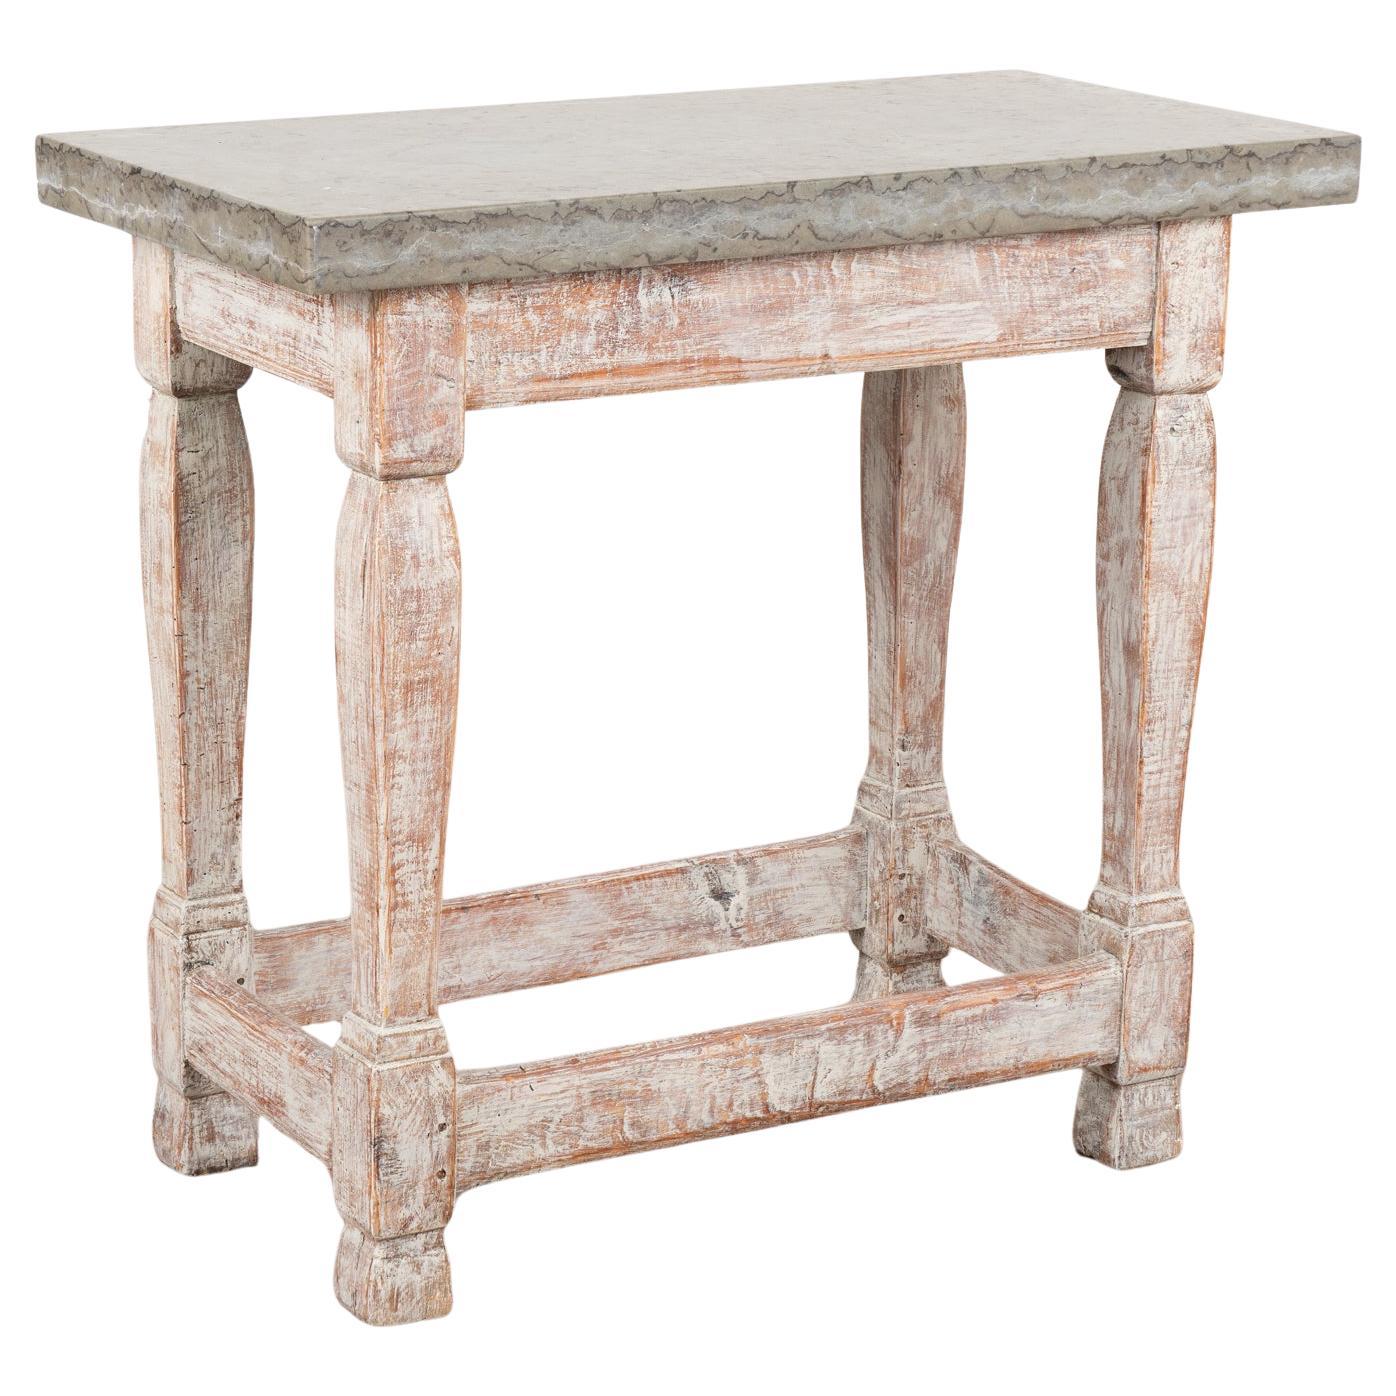 Stone Top Side Table Small Console Table, Sweden circa 1800-40